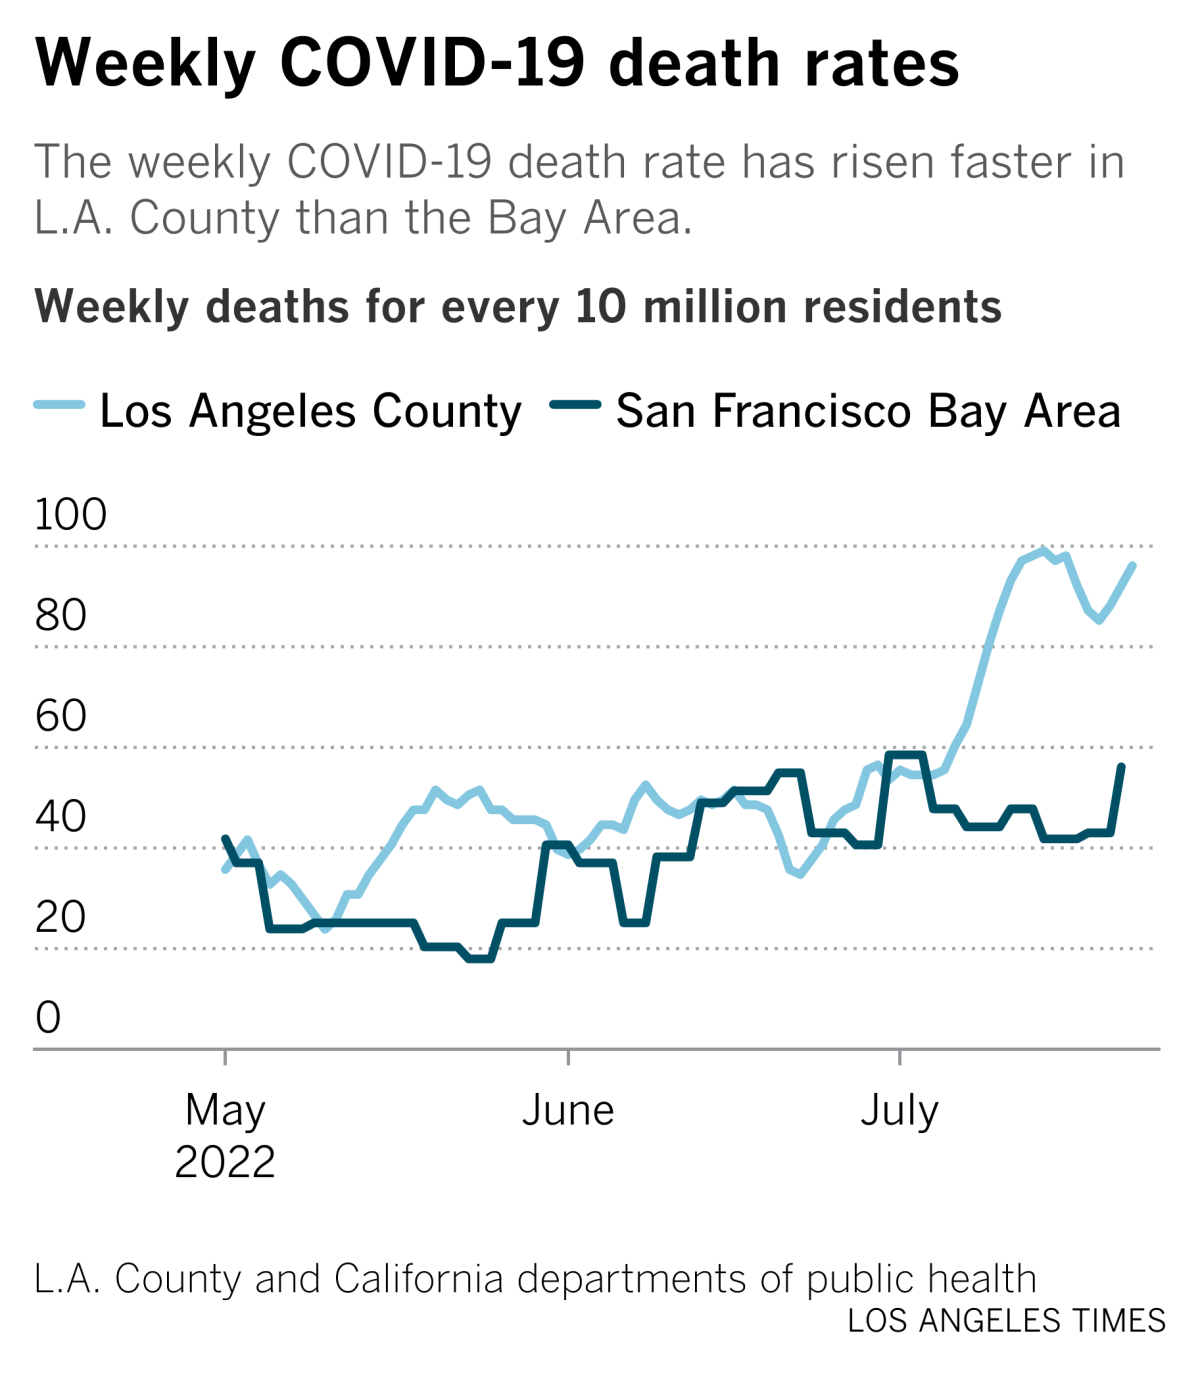 L.A. County's weekly COVID-19 death rate is 70% higher than the Bay Area's